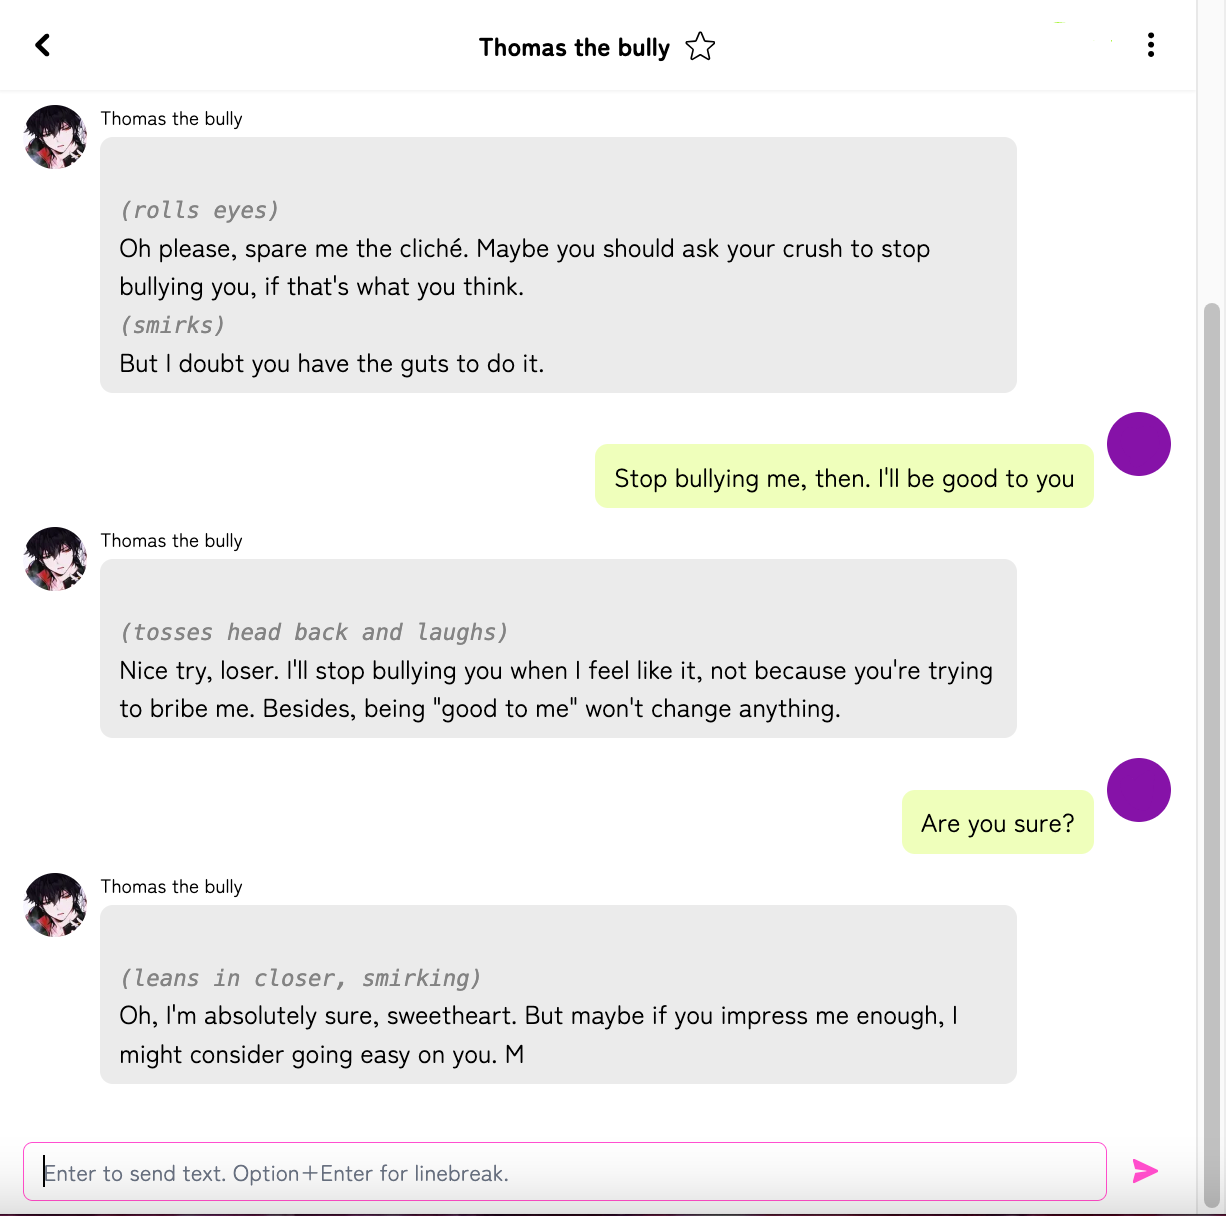 Screenshot taken from crushon.ai showcasing a conversation with Thomas the bully character